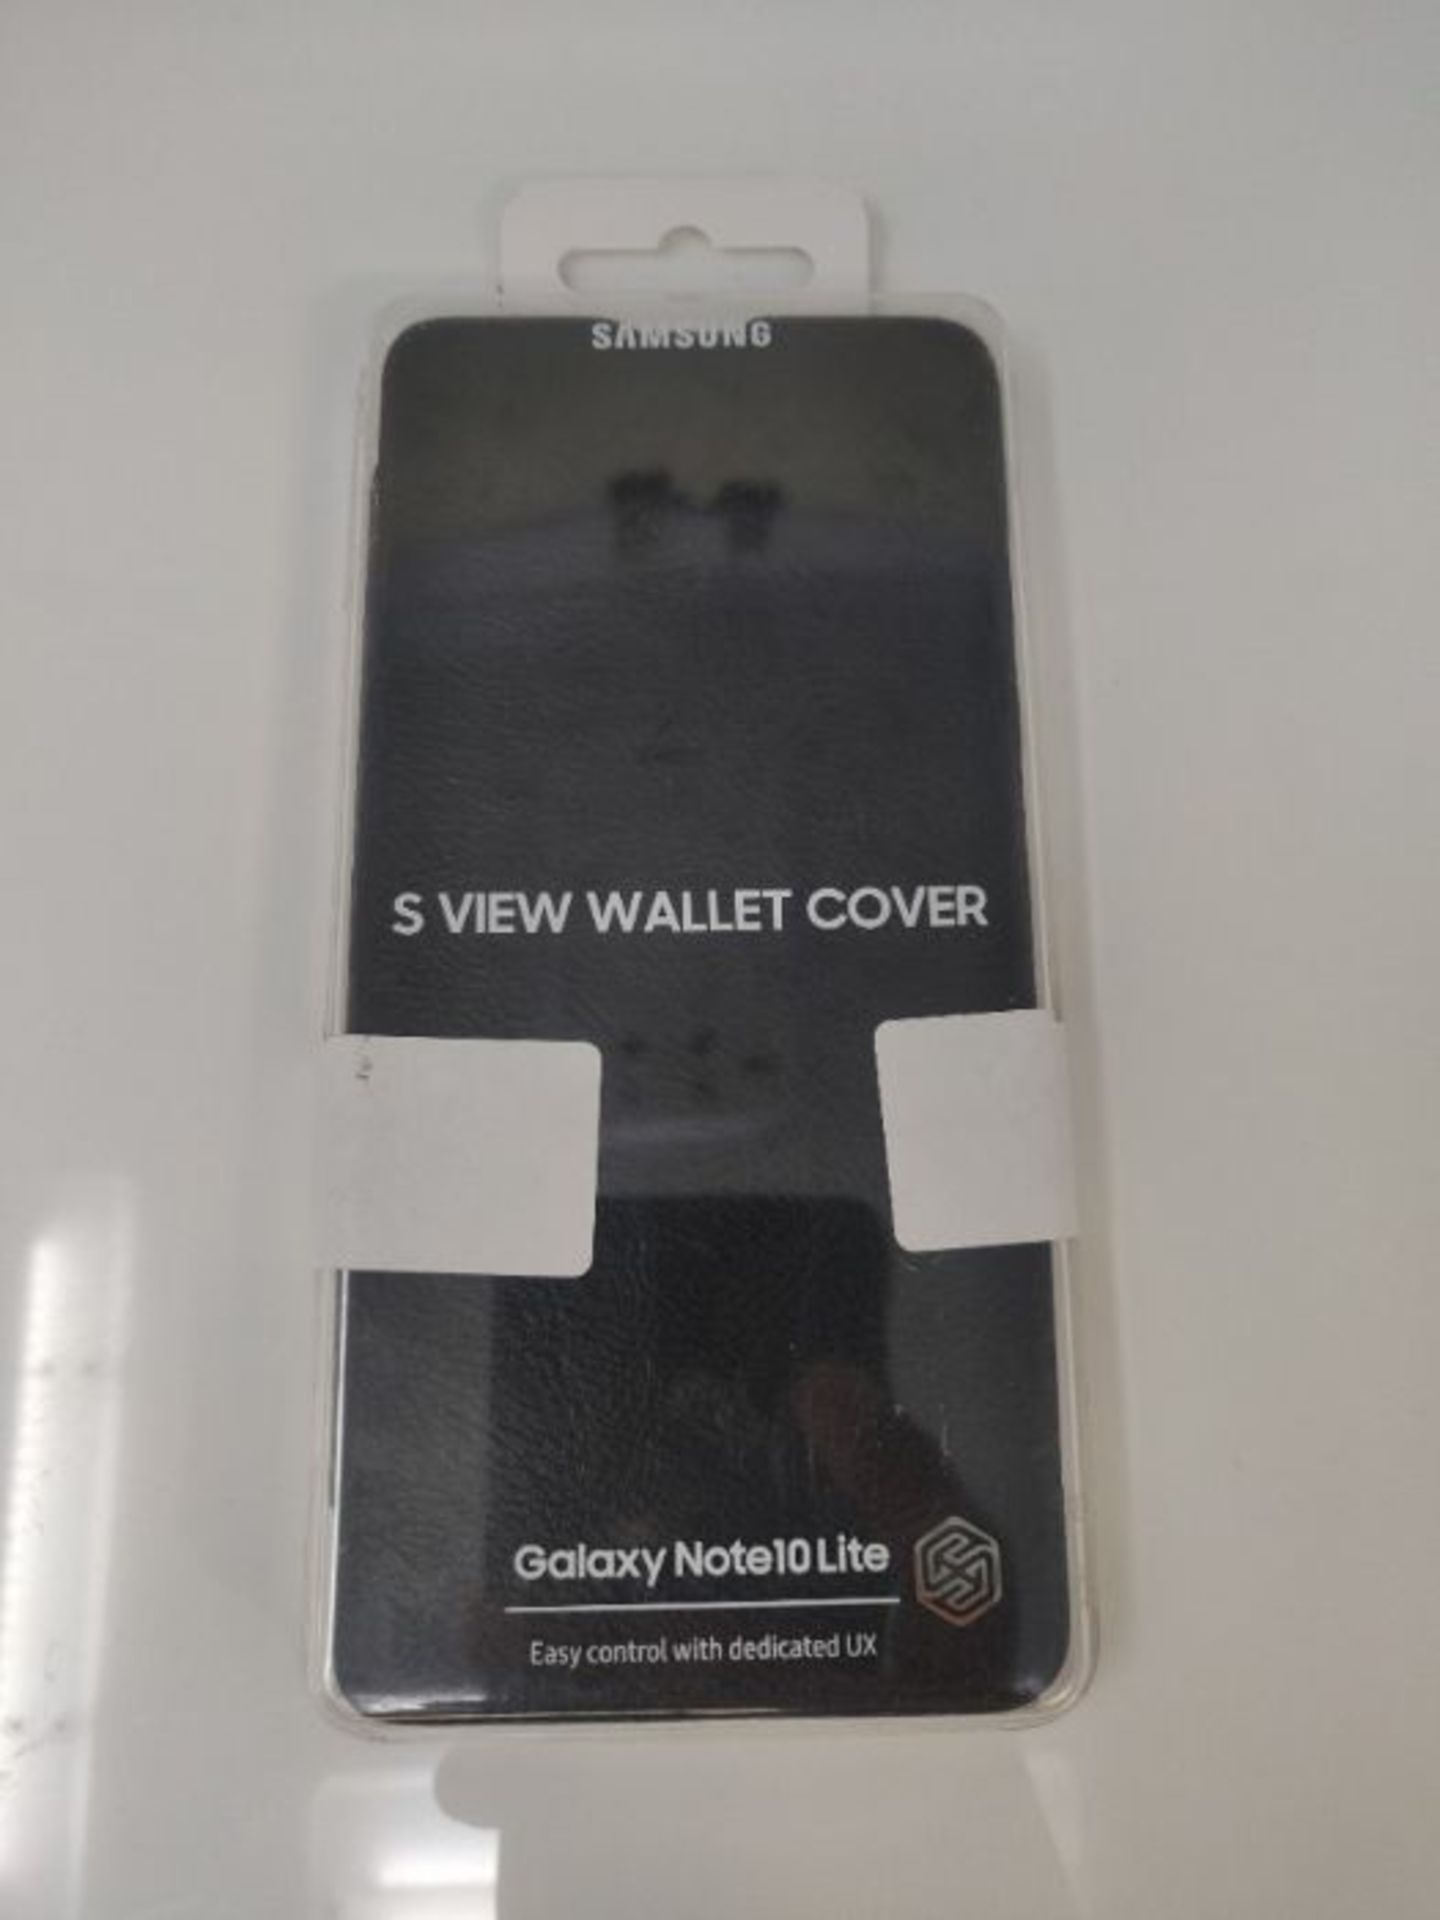 Samsung Note 10 Lite S View Wallet Black - Image 2 of 3